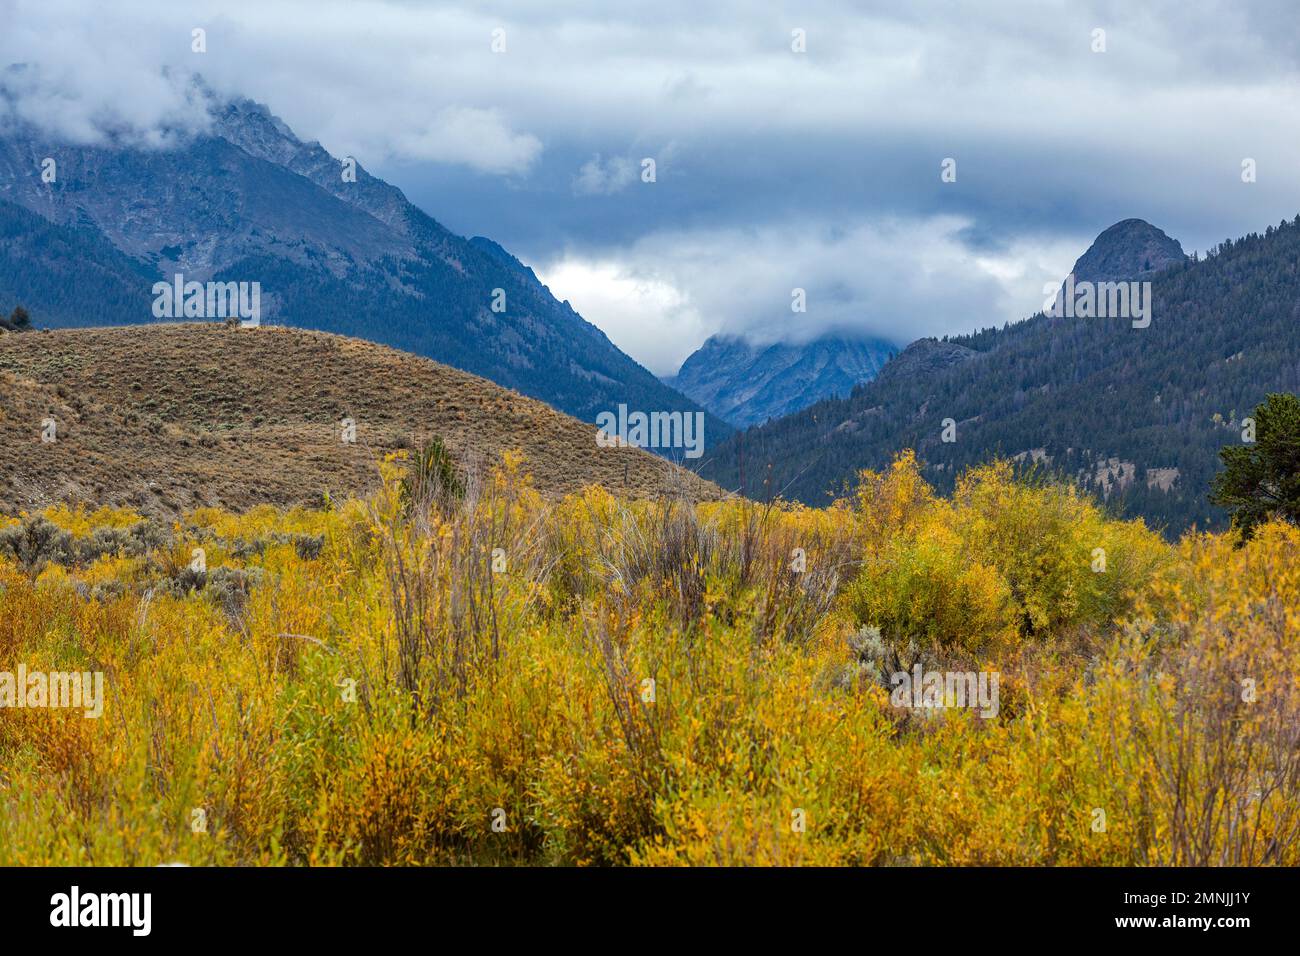 USA, Idaho, Sun Valley, Fall foliage and storm clouds in wilderness Stock Photo